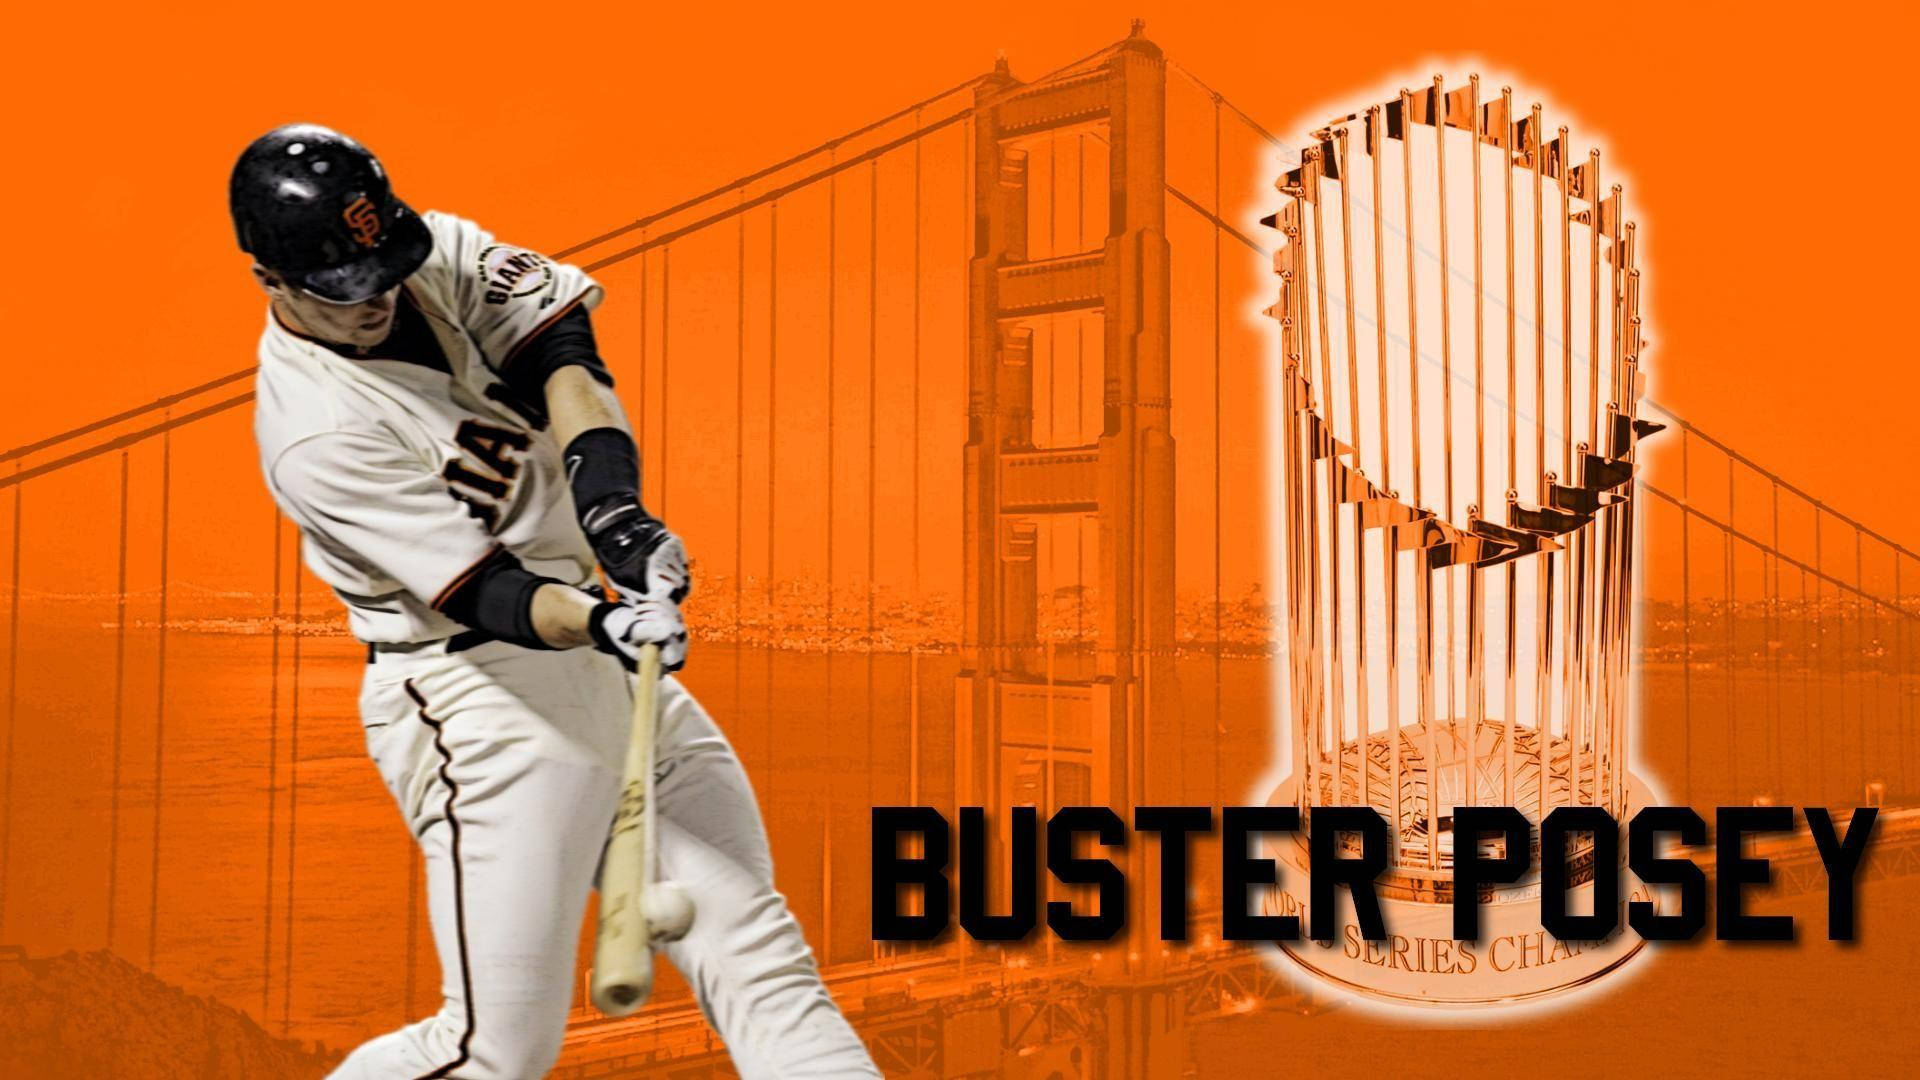 Buster Posey World Series Background